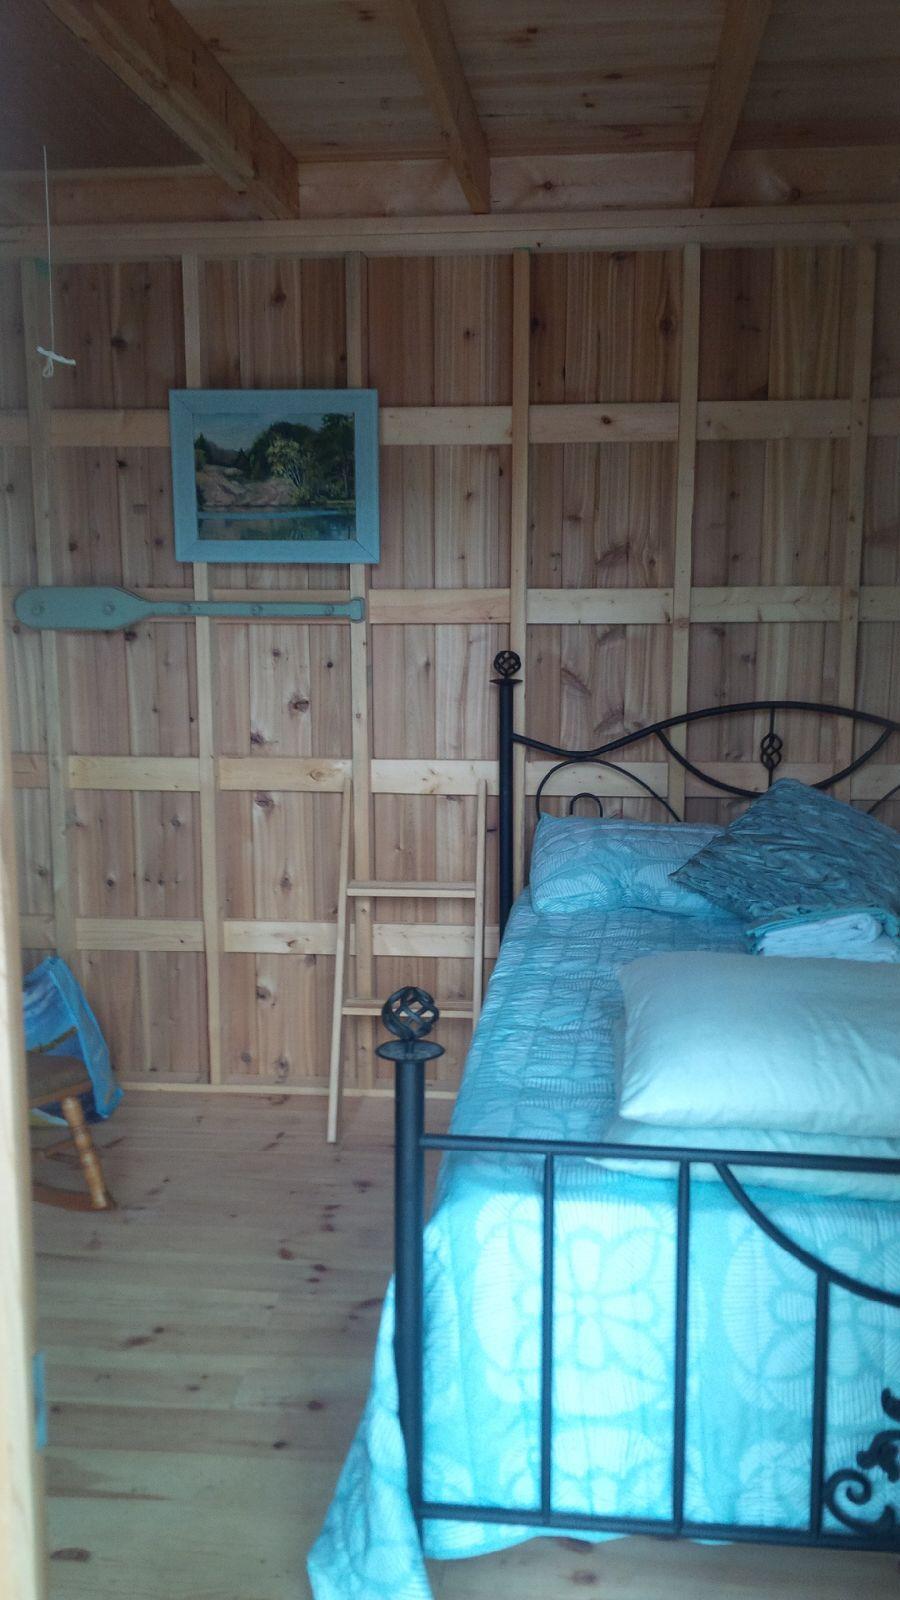 Cedar Glen Echo cabin 10x10 with french lite in Dunsford Ontario. ID number 207582-6